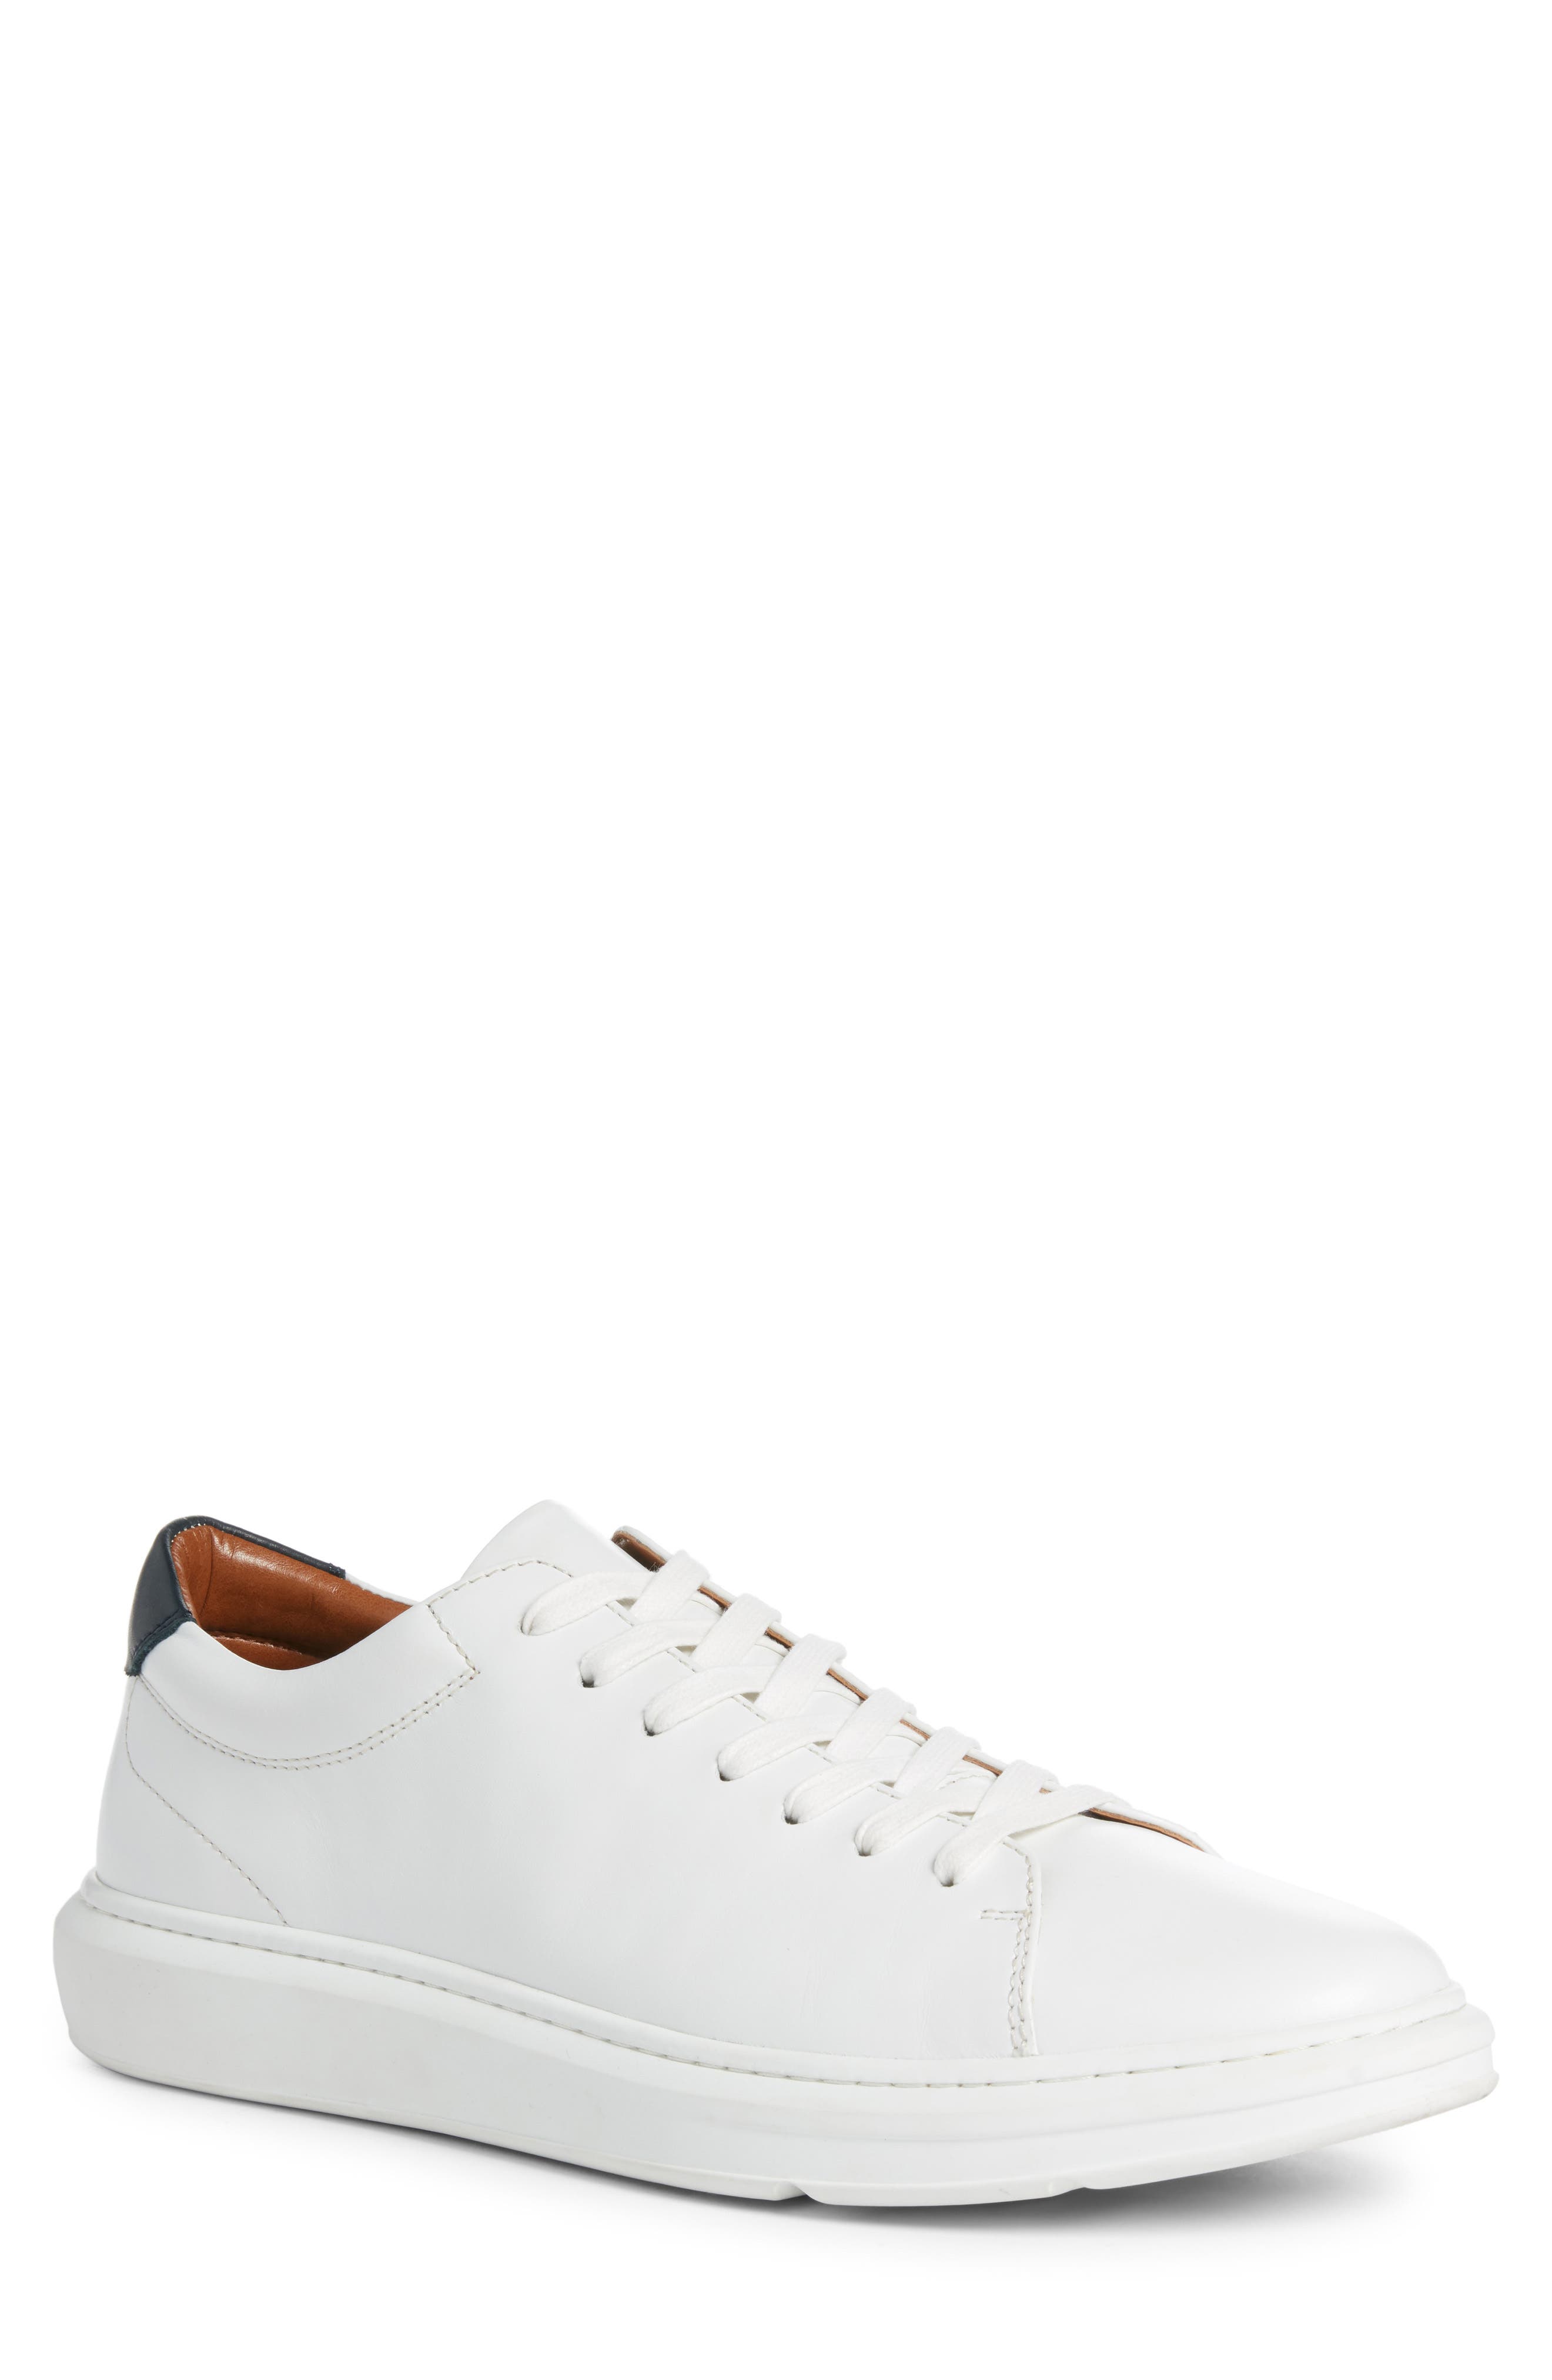 nordstrom white shoes